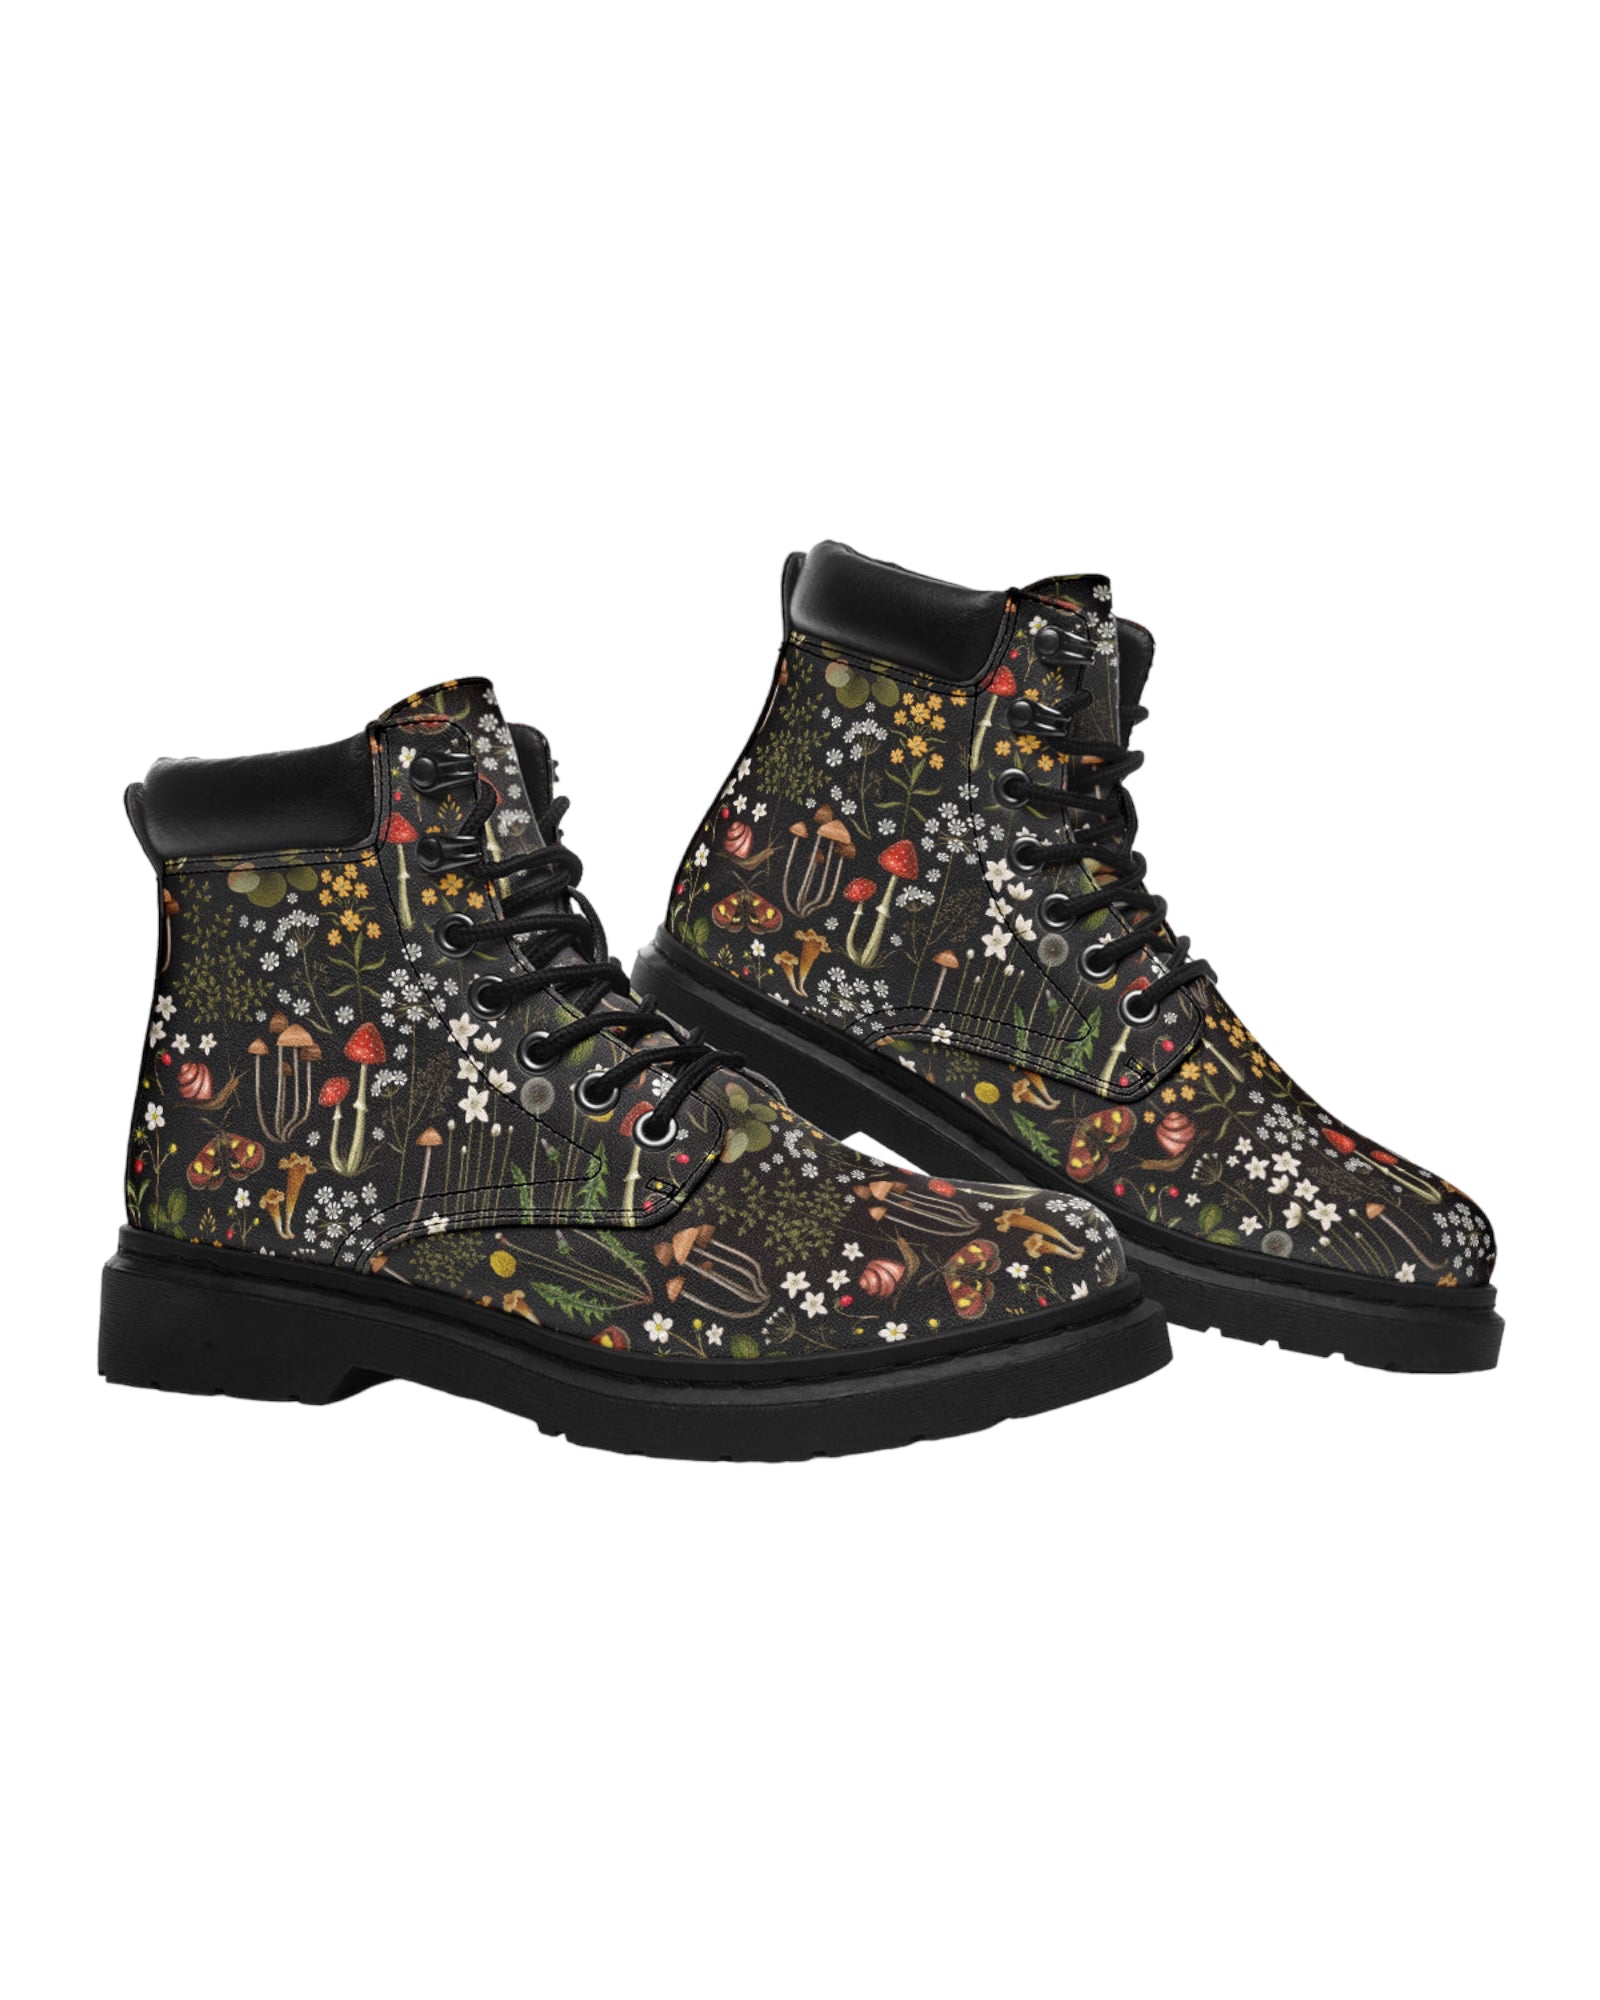 Forest Festival Boots